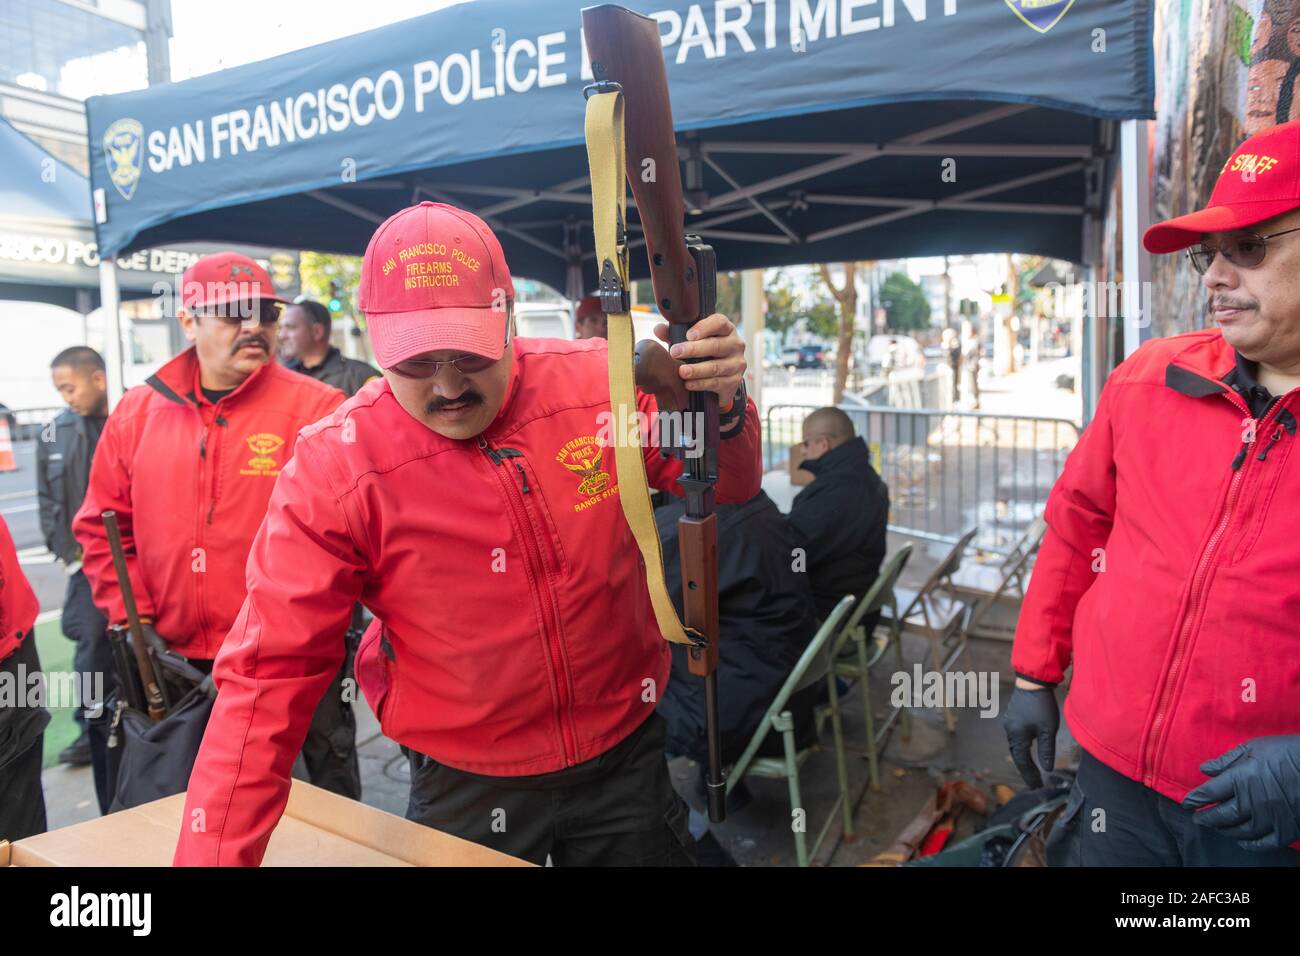 Police officers are checking a brand new Thompson submachine gun traded in by people during the annual gun buy-back event hosted by United Playaz in San Francisco, California, United States on December 14, 2019. Today marks the 7th anniversary of the Sandy Hook mass shooting. The Sandy Hook Elementary School shooting occurred on December 14, 2012, in Newtown, Connecticut, United States, when 20-year-old Adam Lanza shot and killed 26 people, including 20 children between six and seven years old, and six adult staff members with an AR-15 style rifle and a Glock pistol. (Photo by Yichuan Cao/Sipa Stock Photo